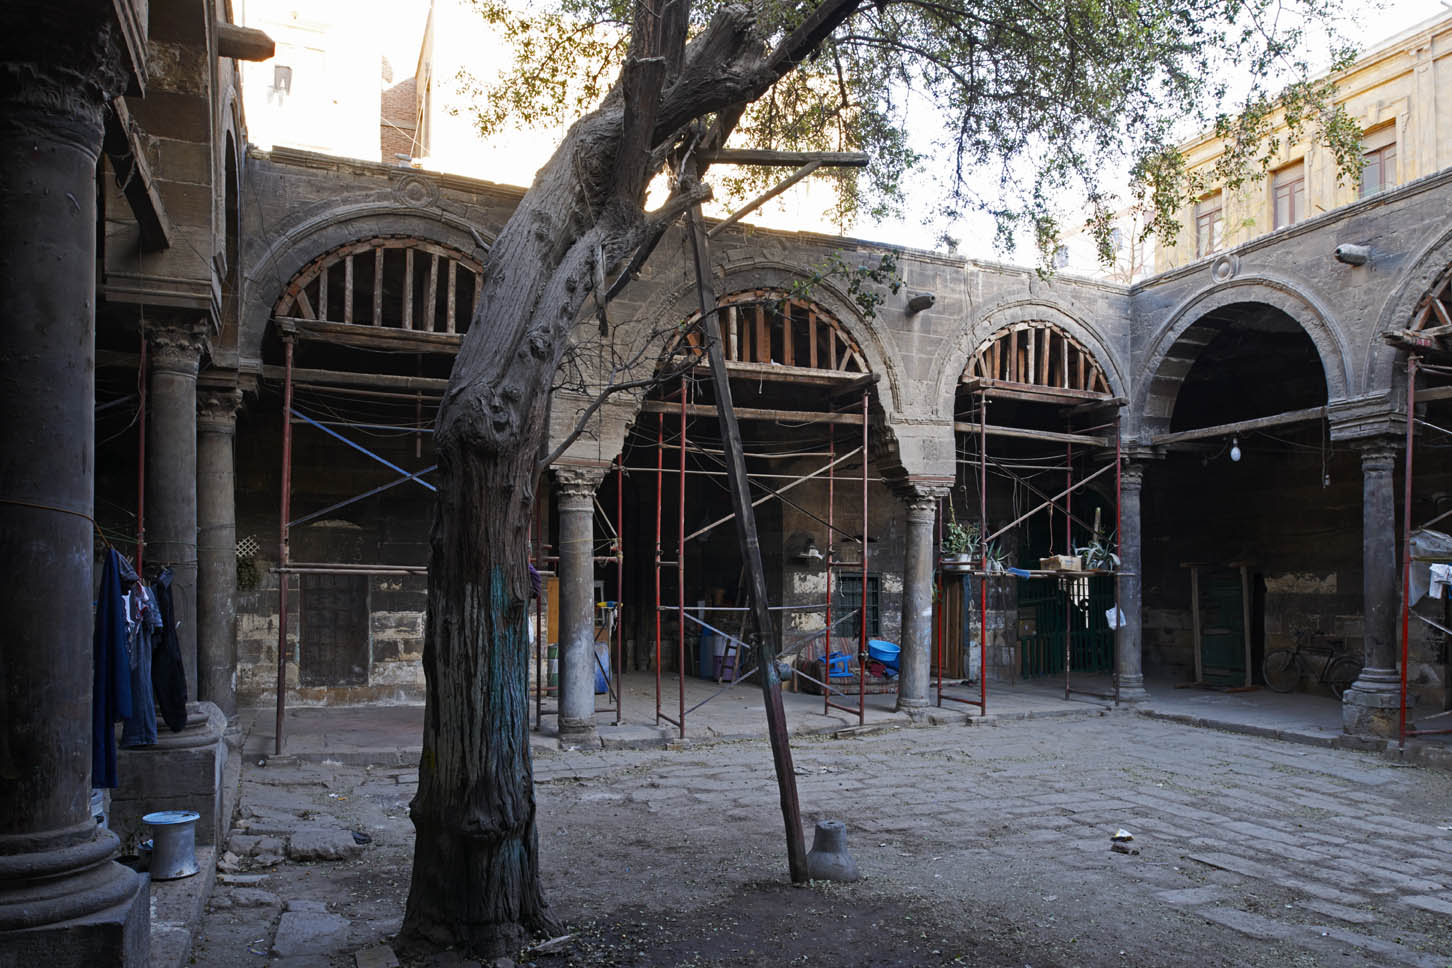 View within courtyard, with scaffolding in place in arches